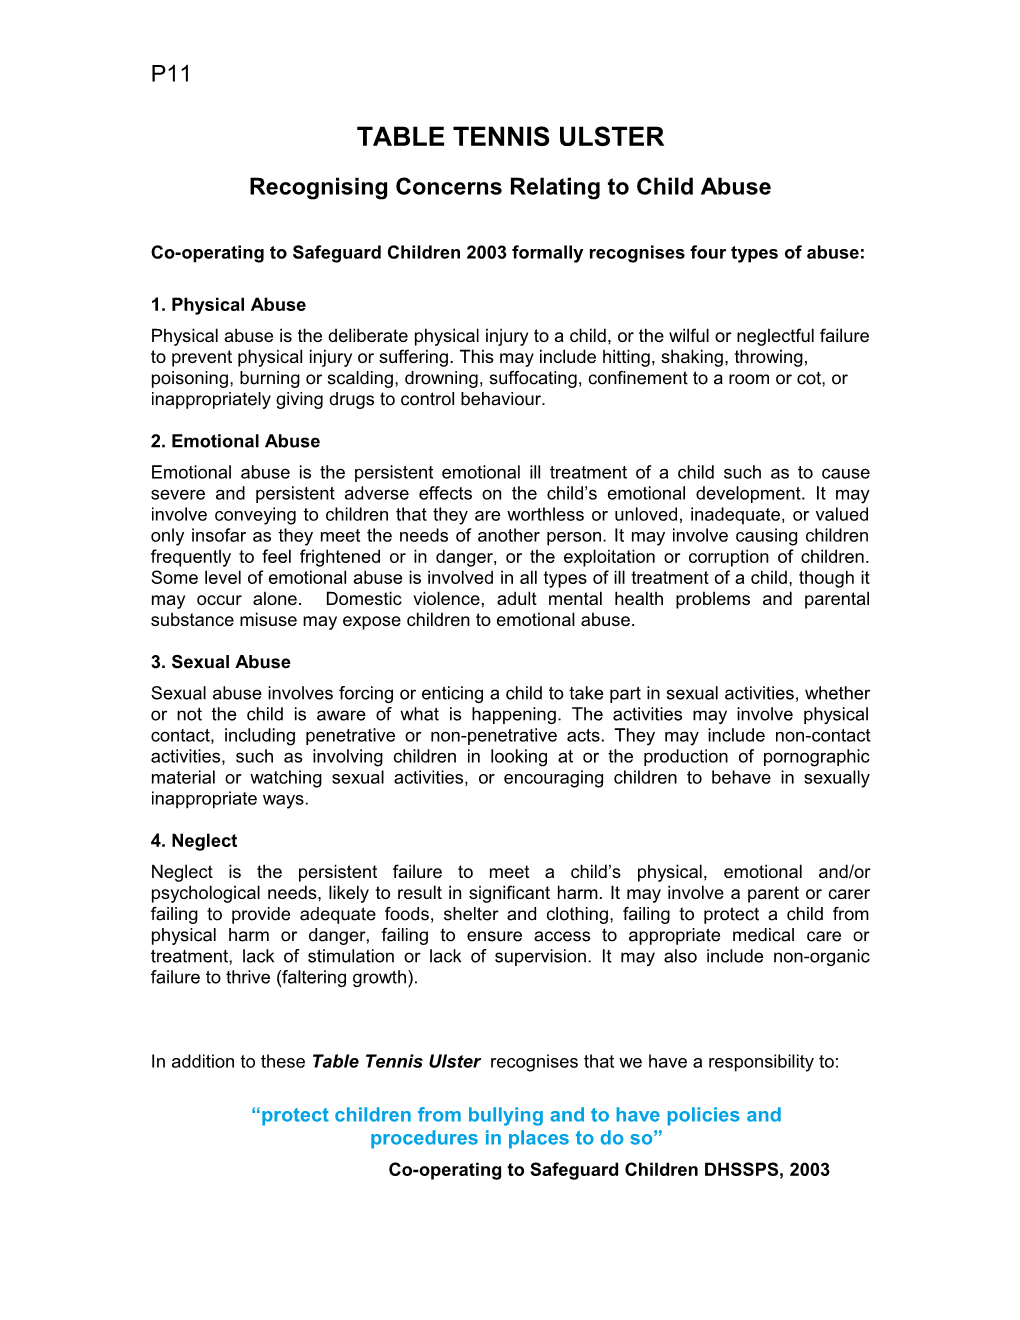 Co-Operating to Safeguard Children 2003 Formally Recognises Four Types of Abuse